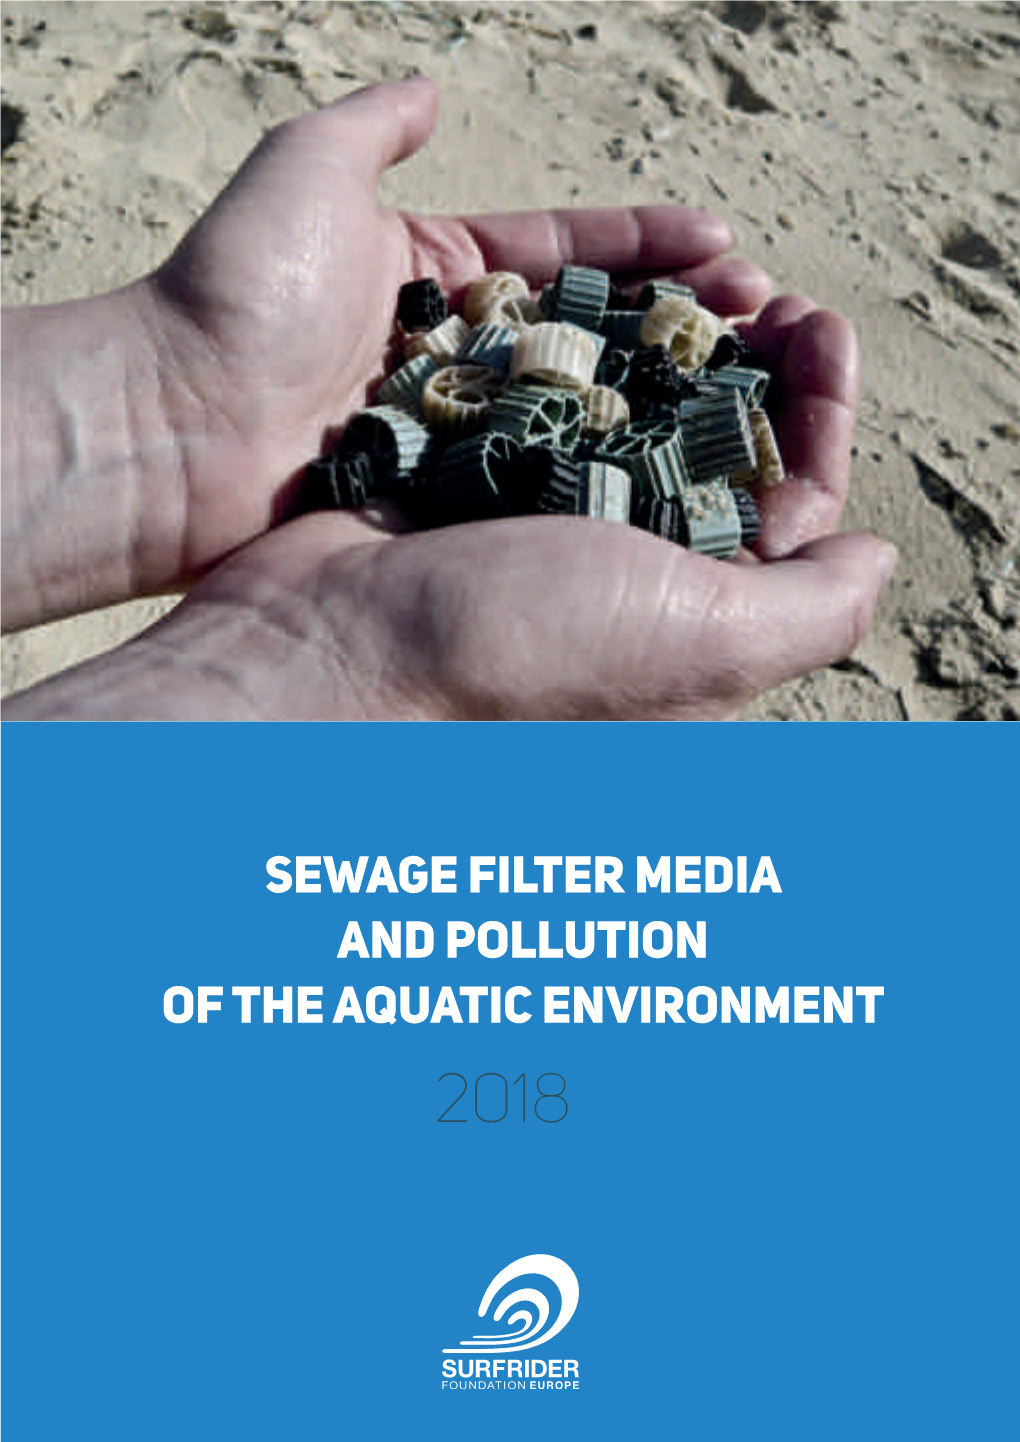 SEWAGE FILTER MEDIA and POLLUTION of the AQUATIC ENVIRONMENT 2018 July 2018